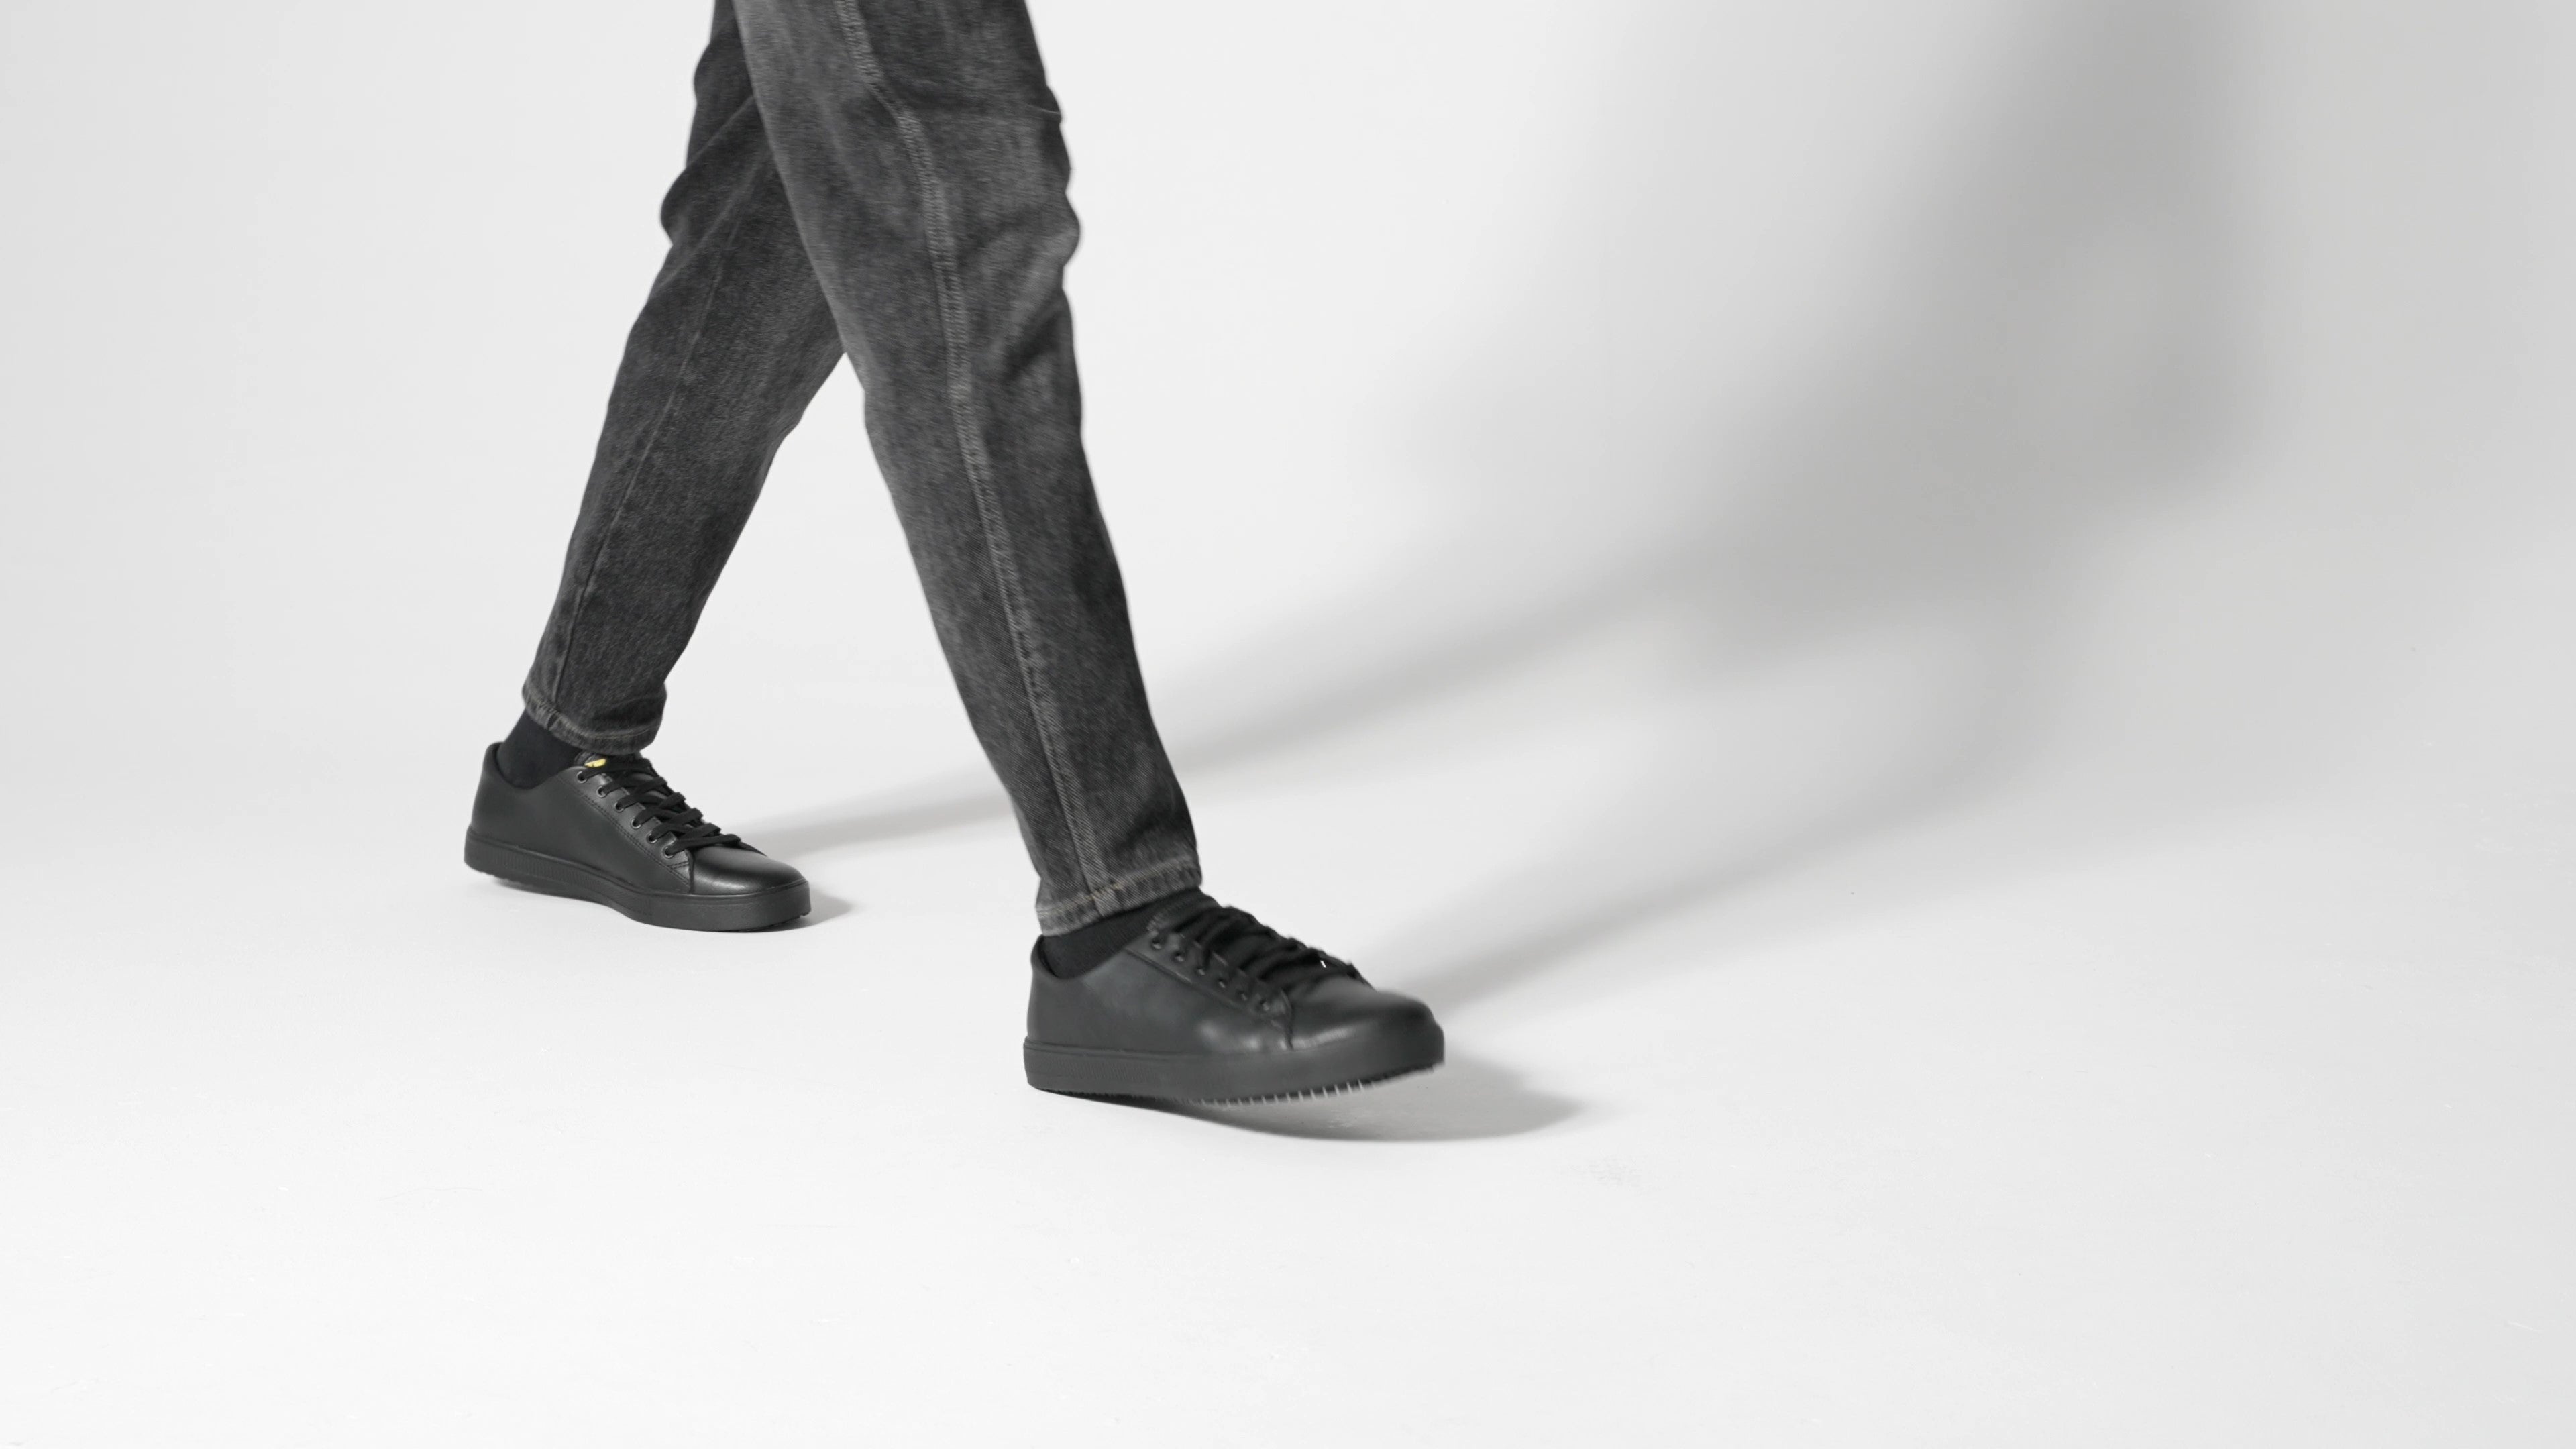 The Old School Low-Rider from Shoes For Crews is an slip-resistant lace-up shoe designed to provide comfort throughout the day, product video.